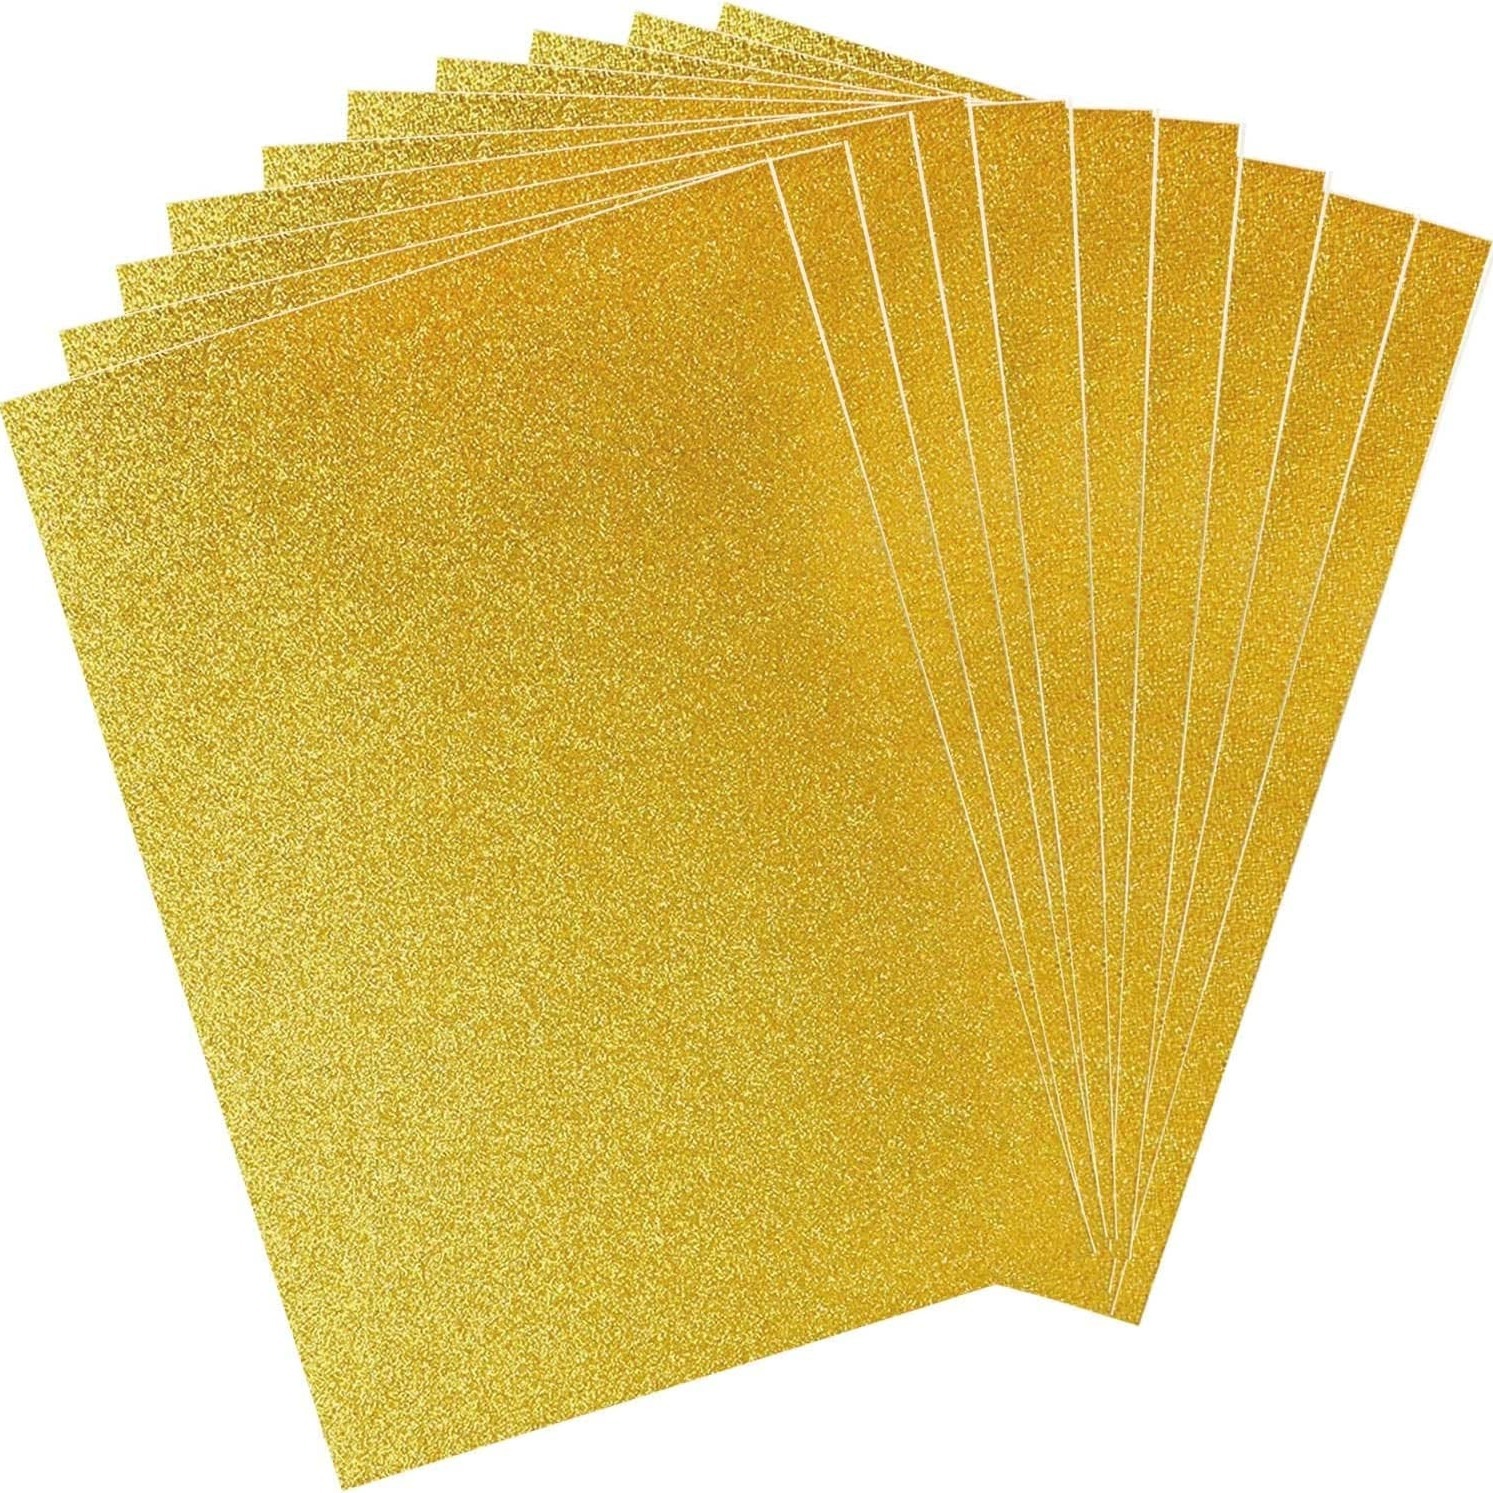 Glitter Cardstock Paper, 30 Sheets 250gsm Glitter Paper, Premium A4 Sparkle  Shinny Craft Paper, 6 Colors Card Stock for DIY Projects, Crafts